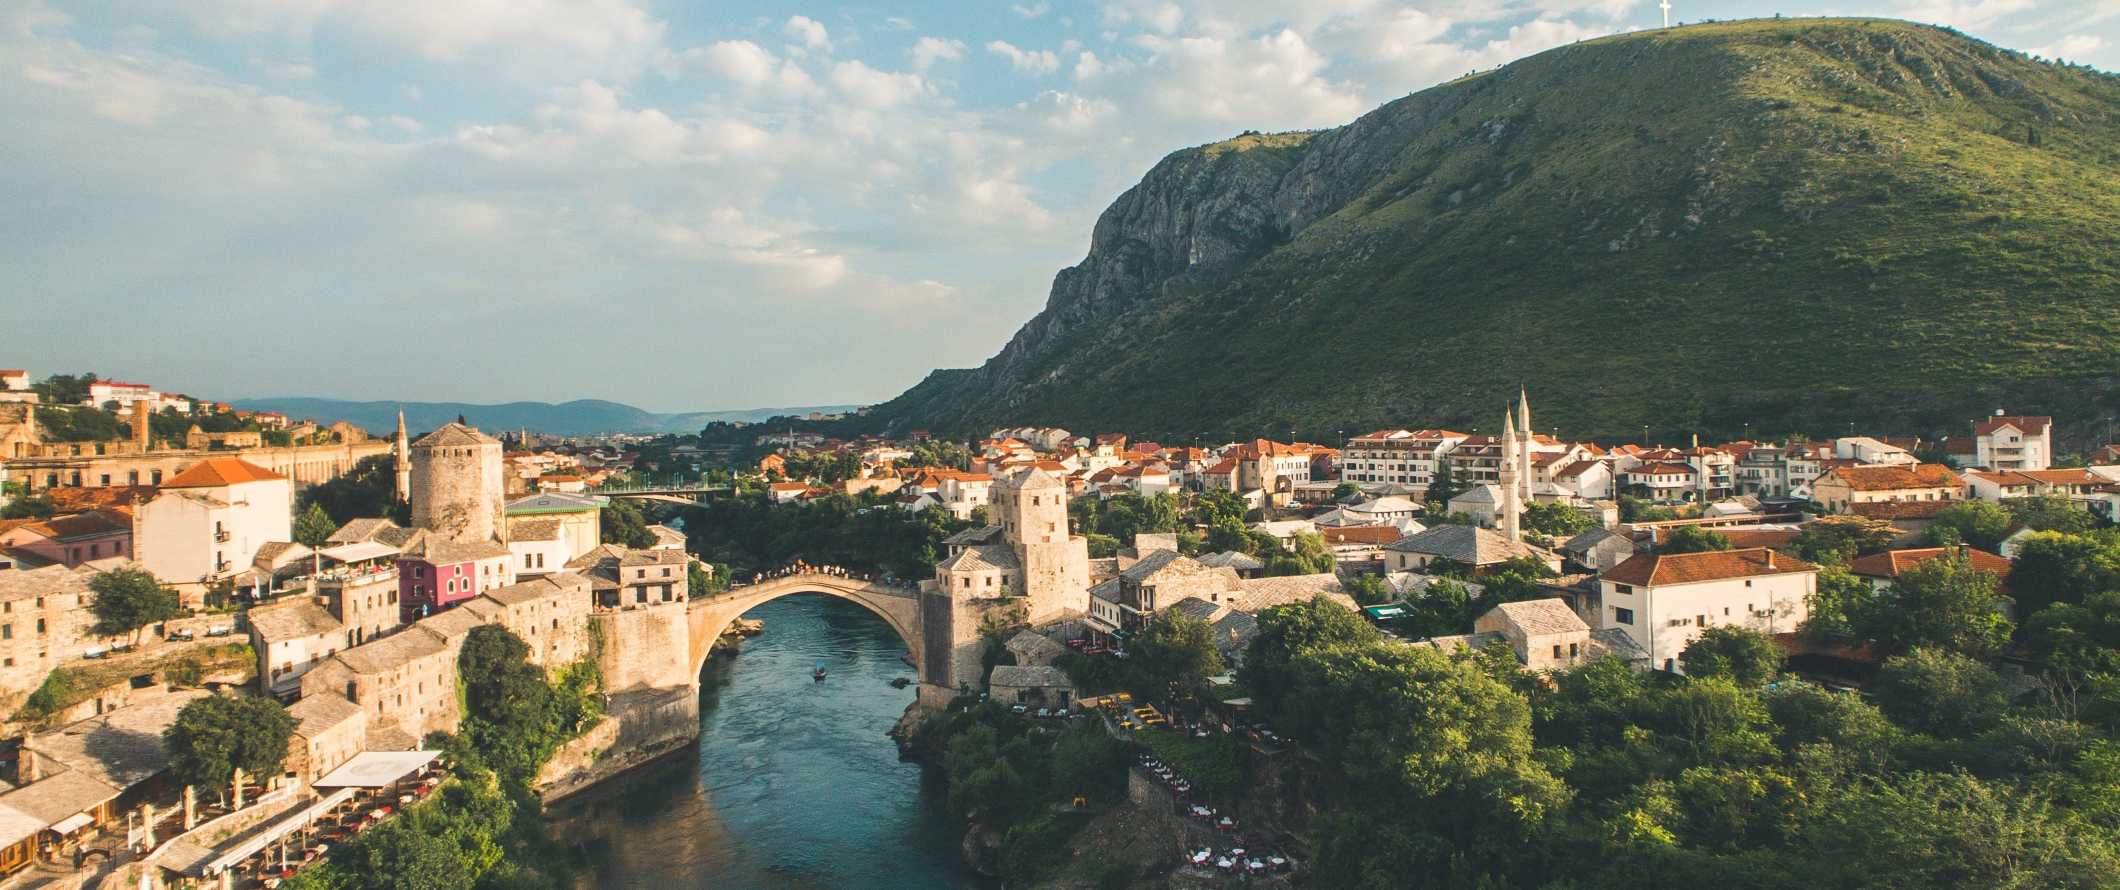 Panoramic view of the historic town of Mostar with its iconic stone arched bridge in Bosnia & Herzegovina